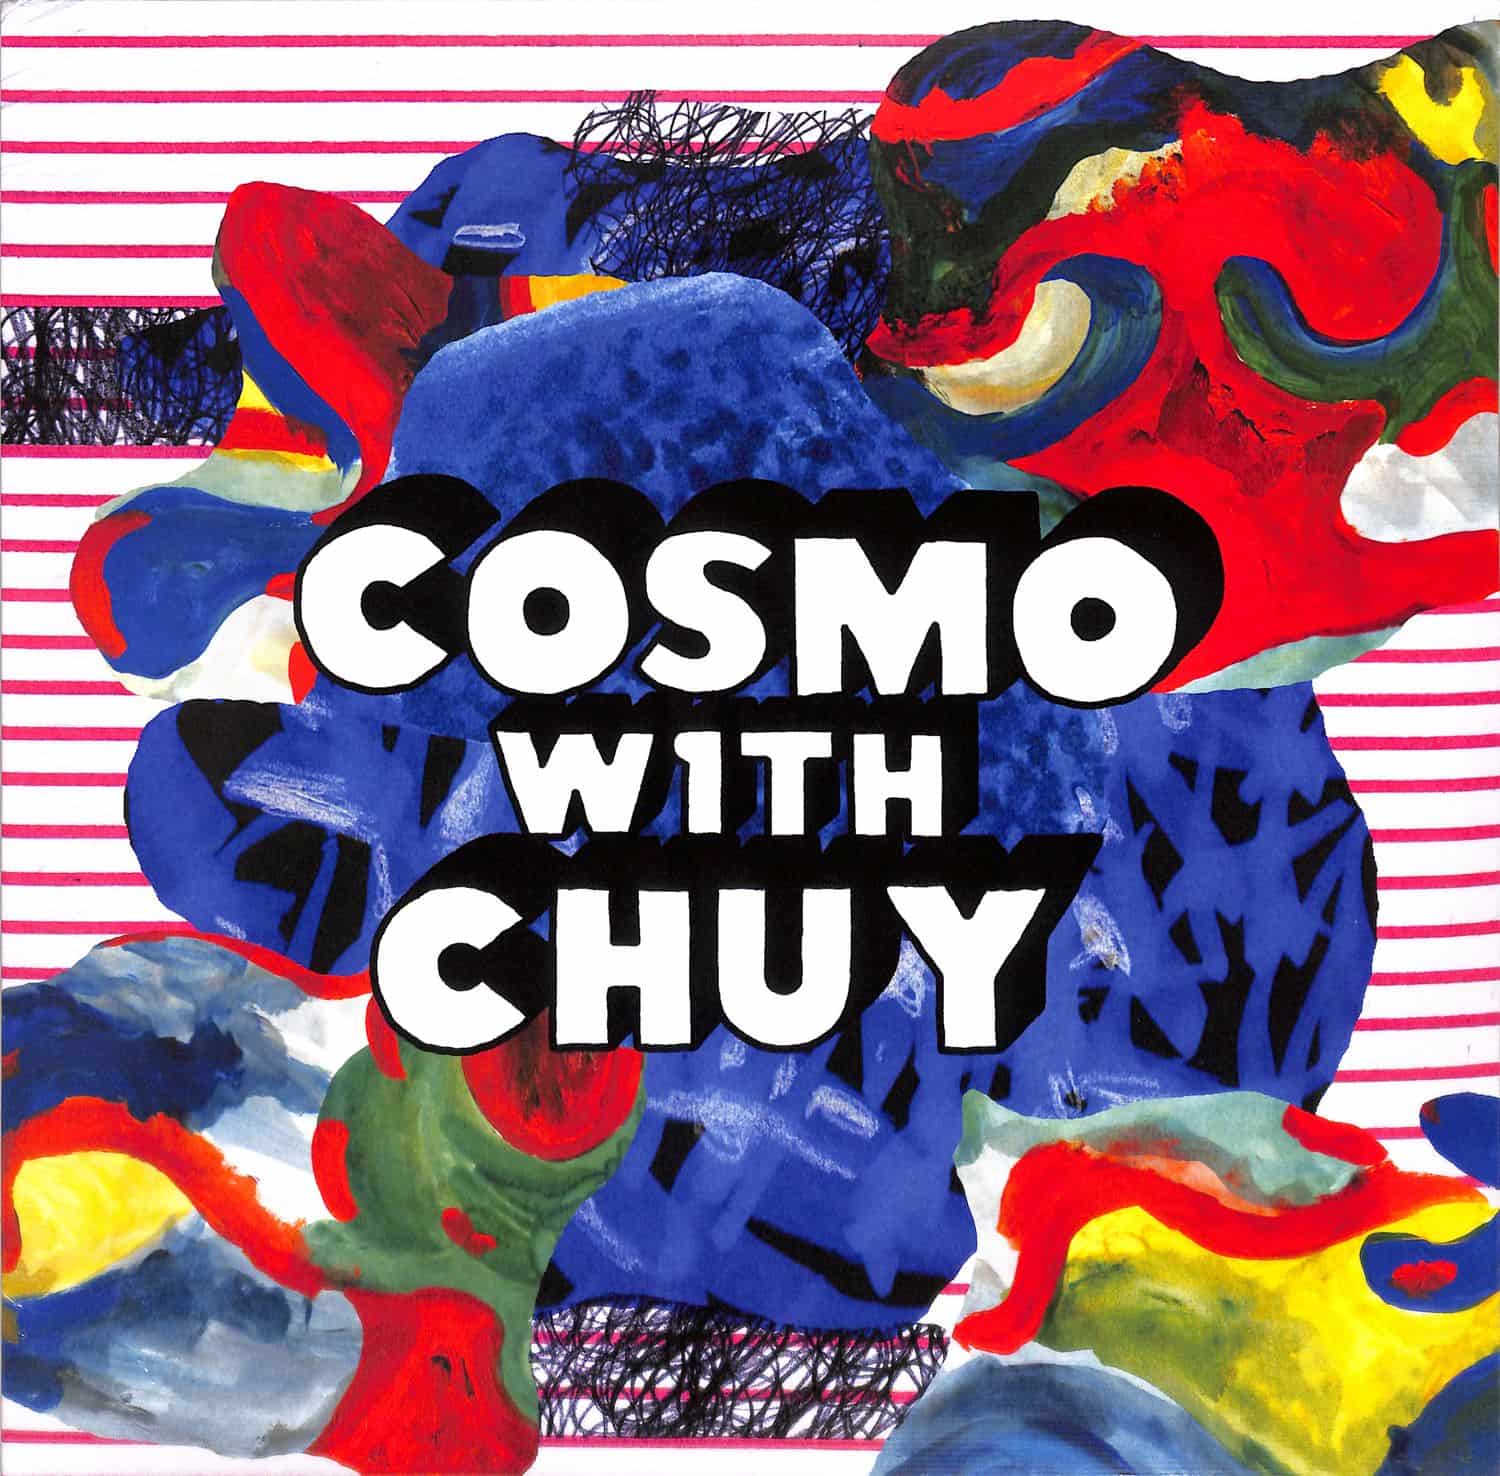 Cosmo With Chuy - I NEED IT